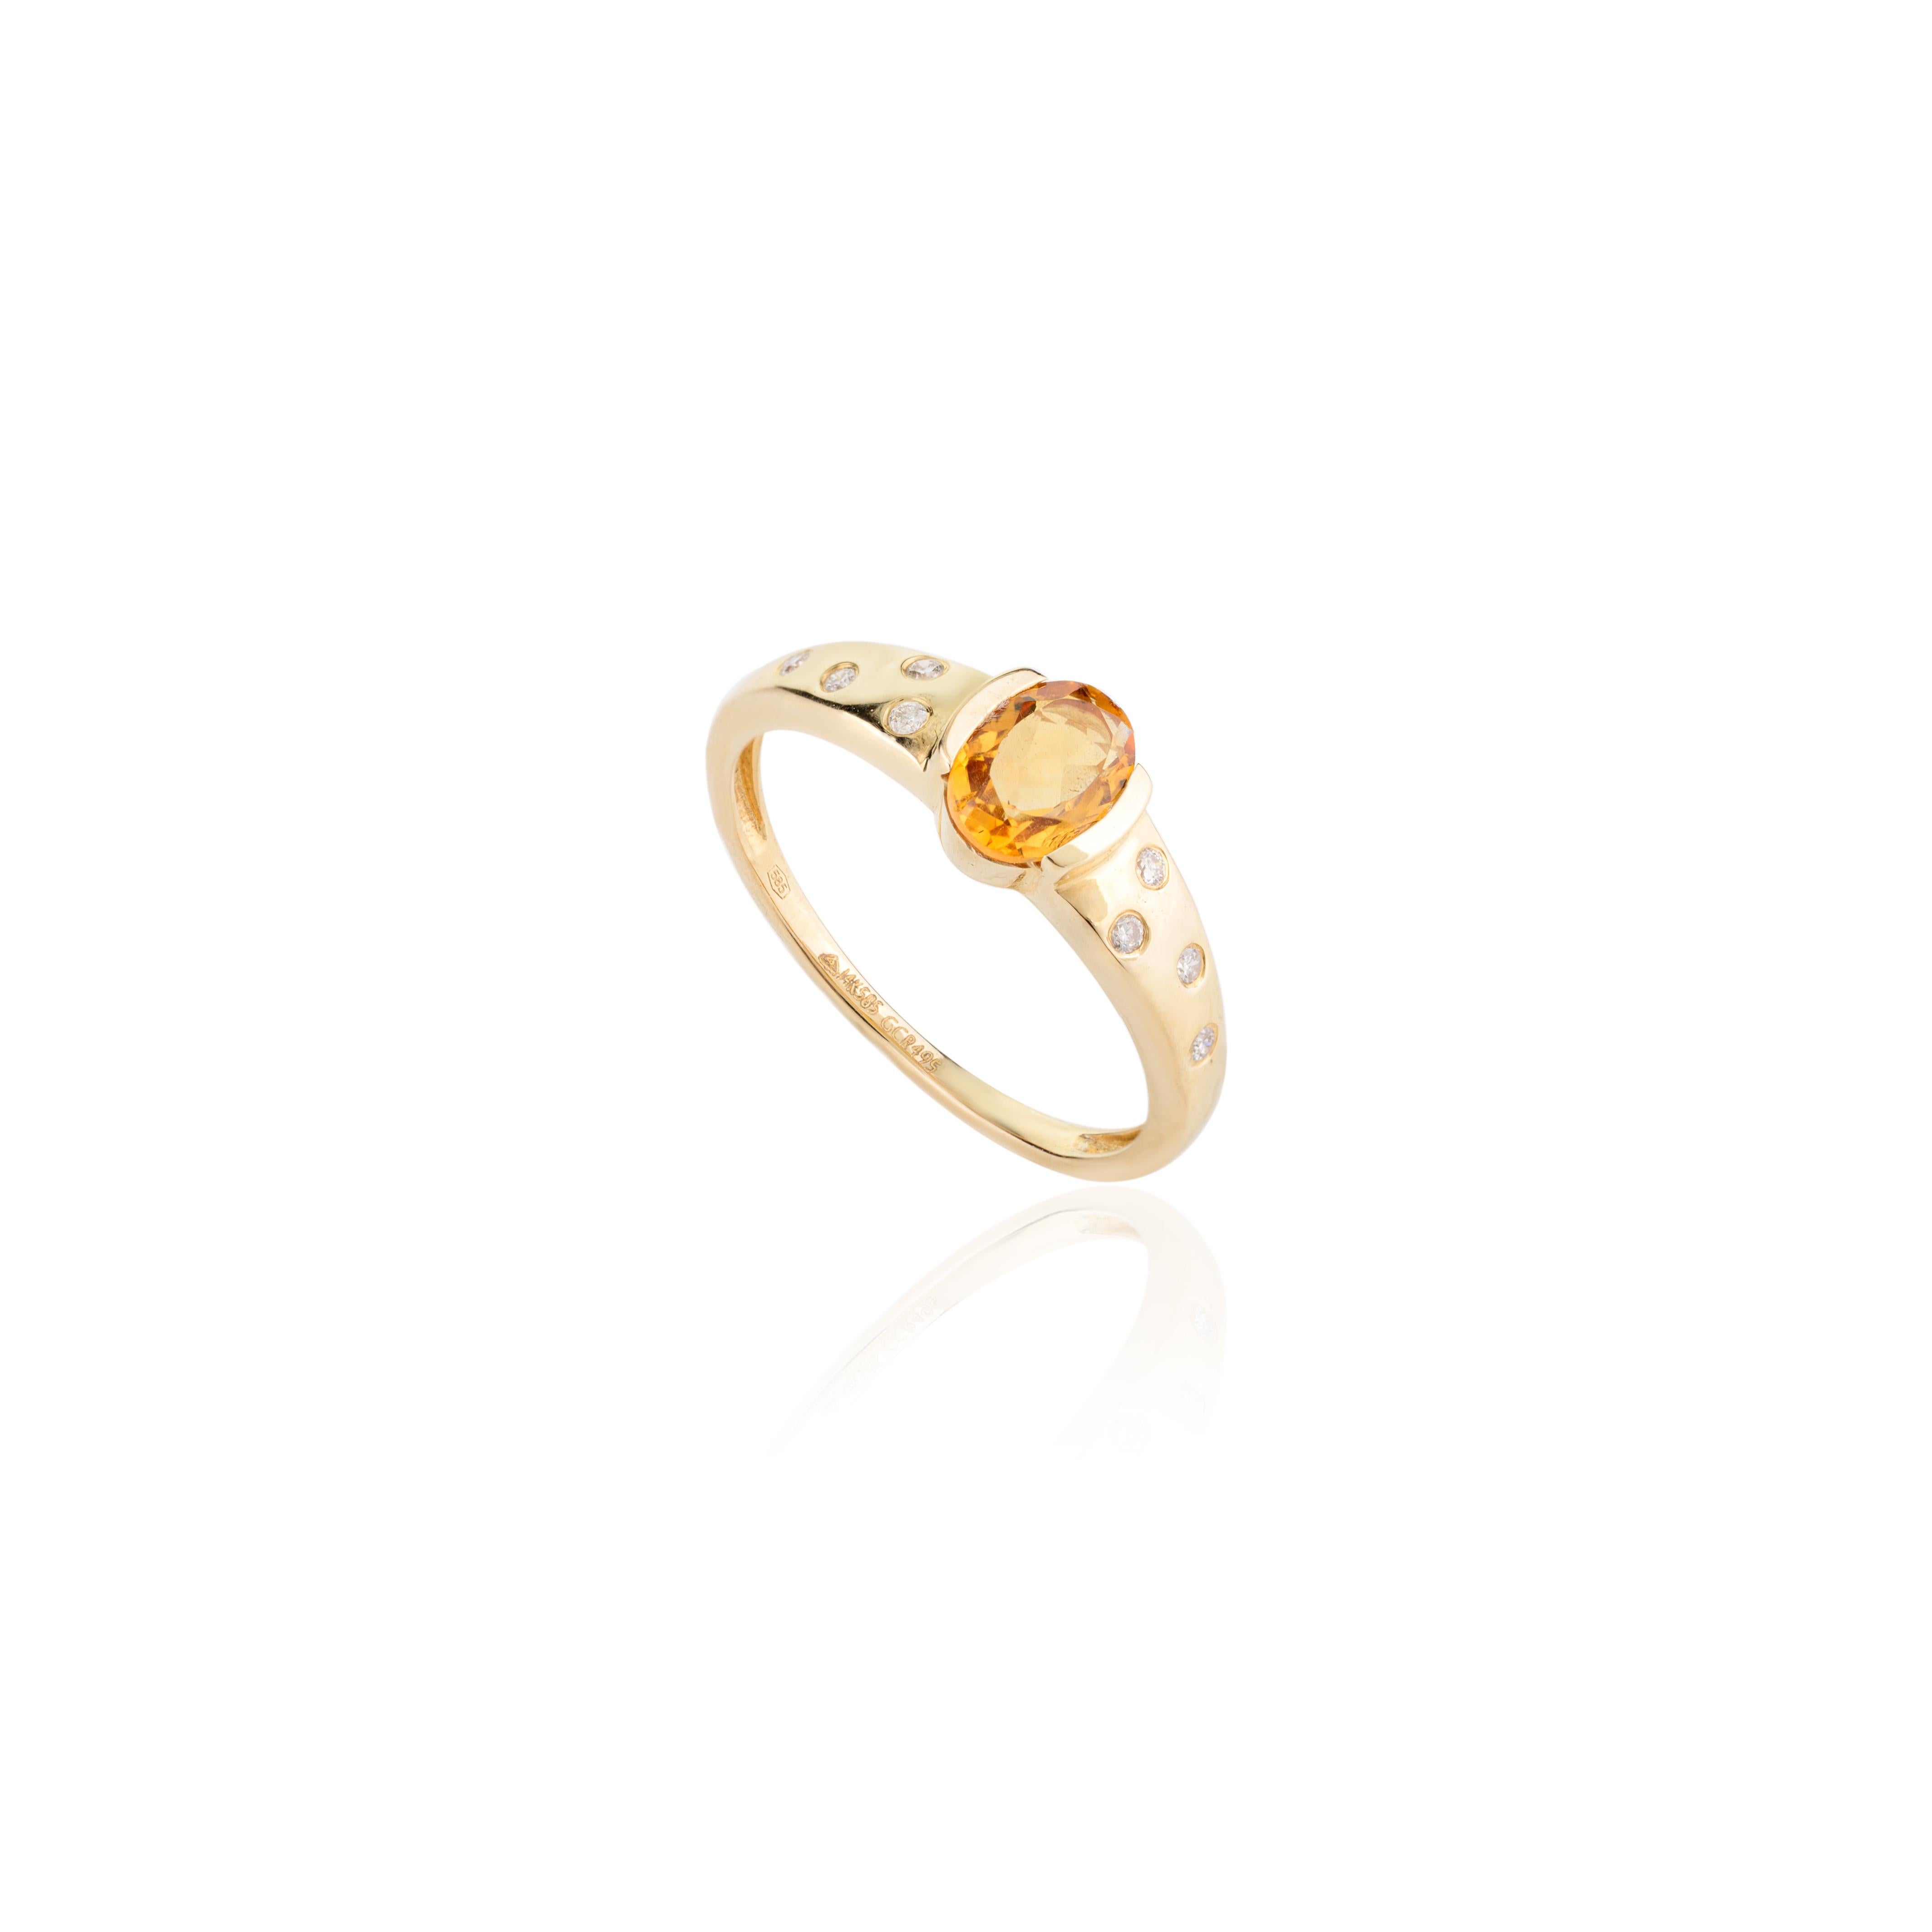 For Sale:  Unisex Natural Citrine and Diamond Engagement Ring in 14k Solid Yellow Gold 3